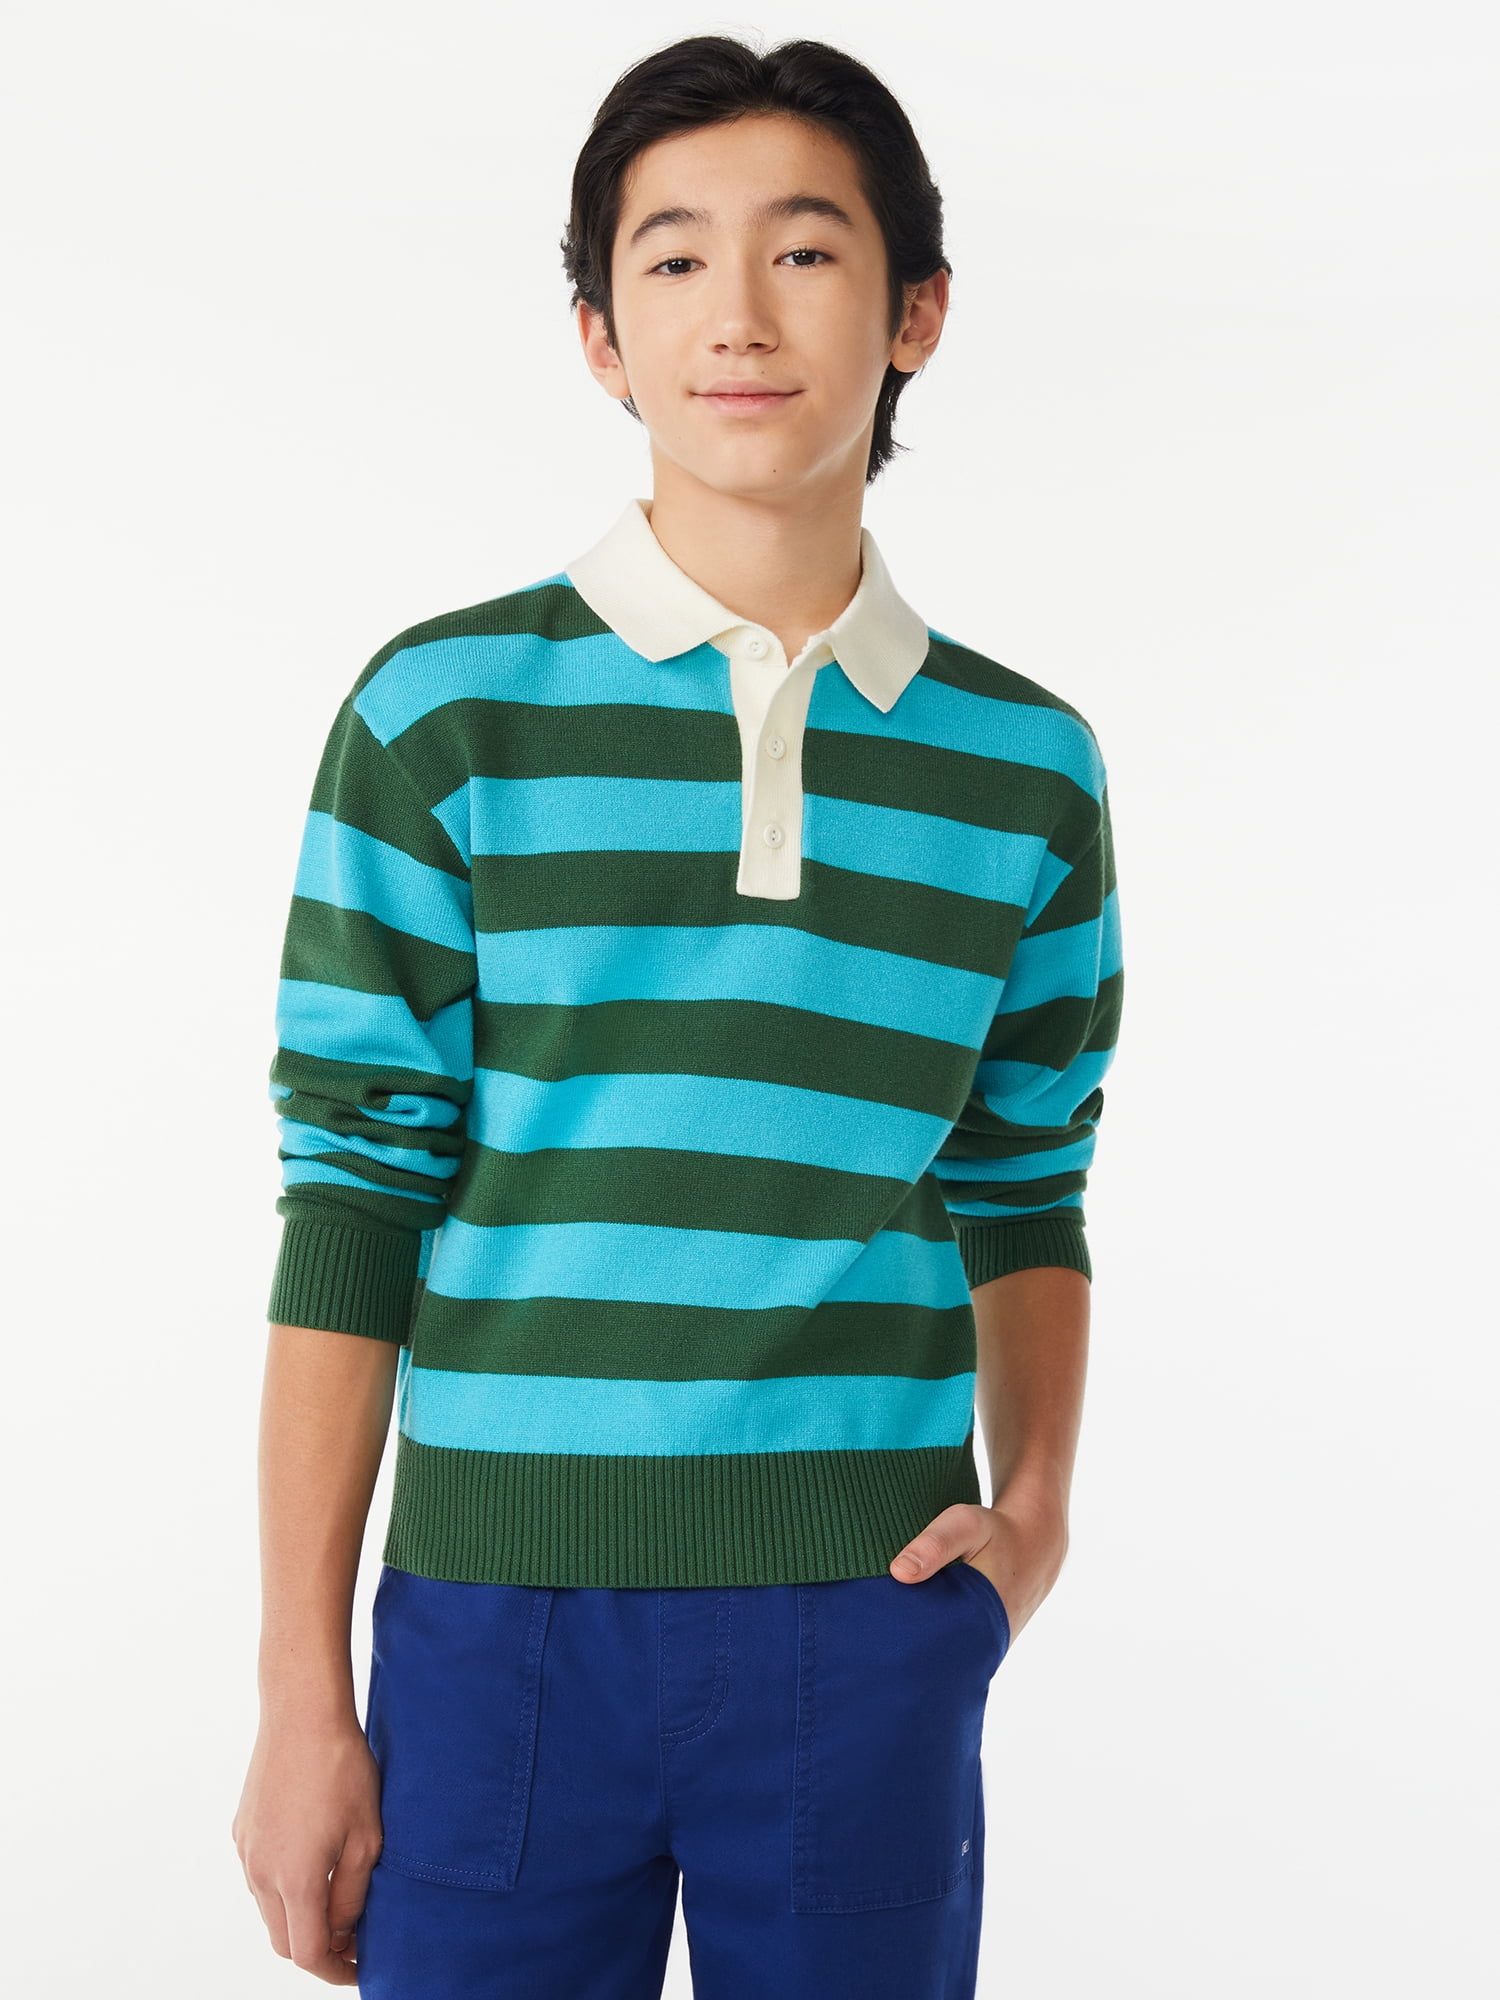 Free Assembly Boys Striped Polo Sweater, Sizes 4-18